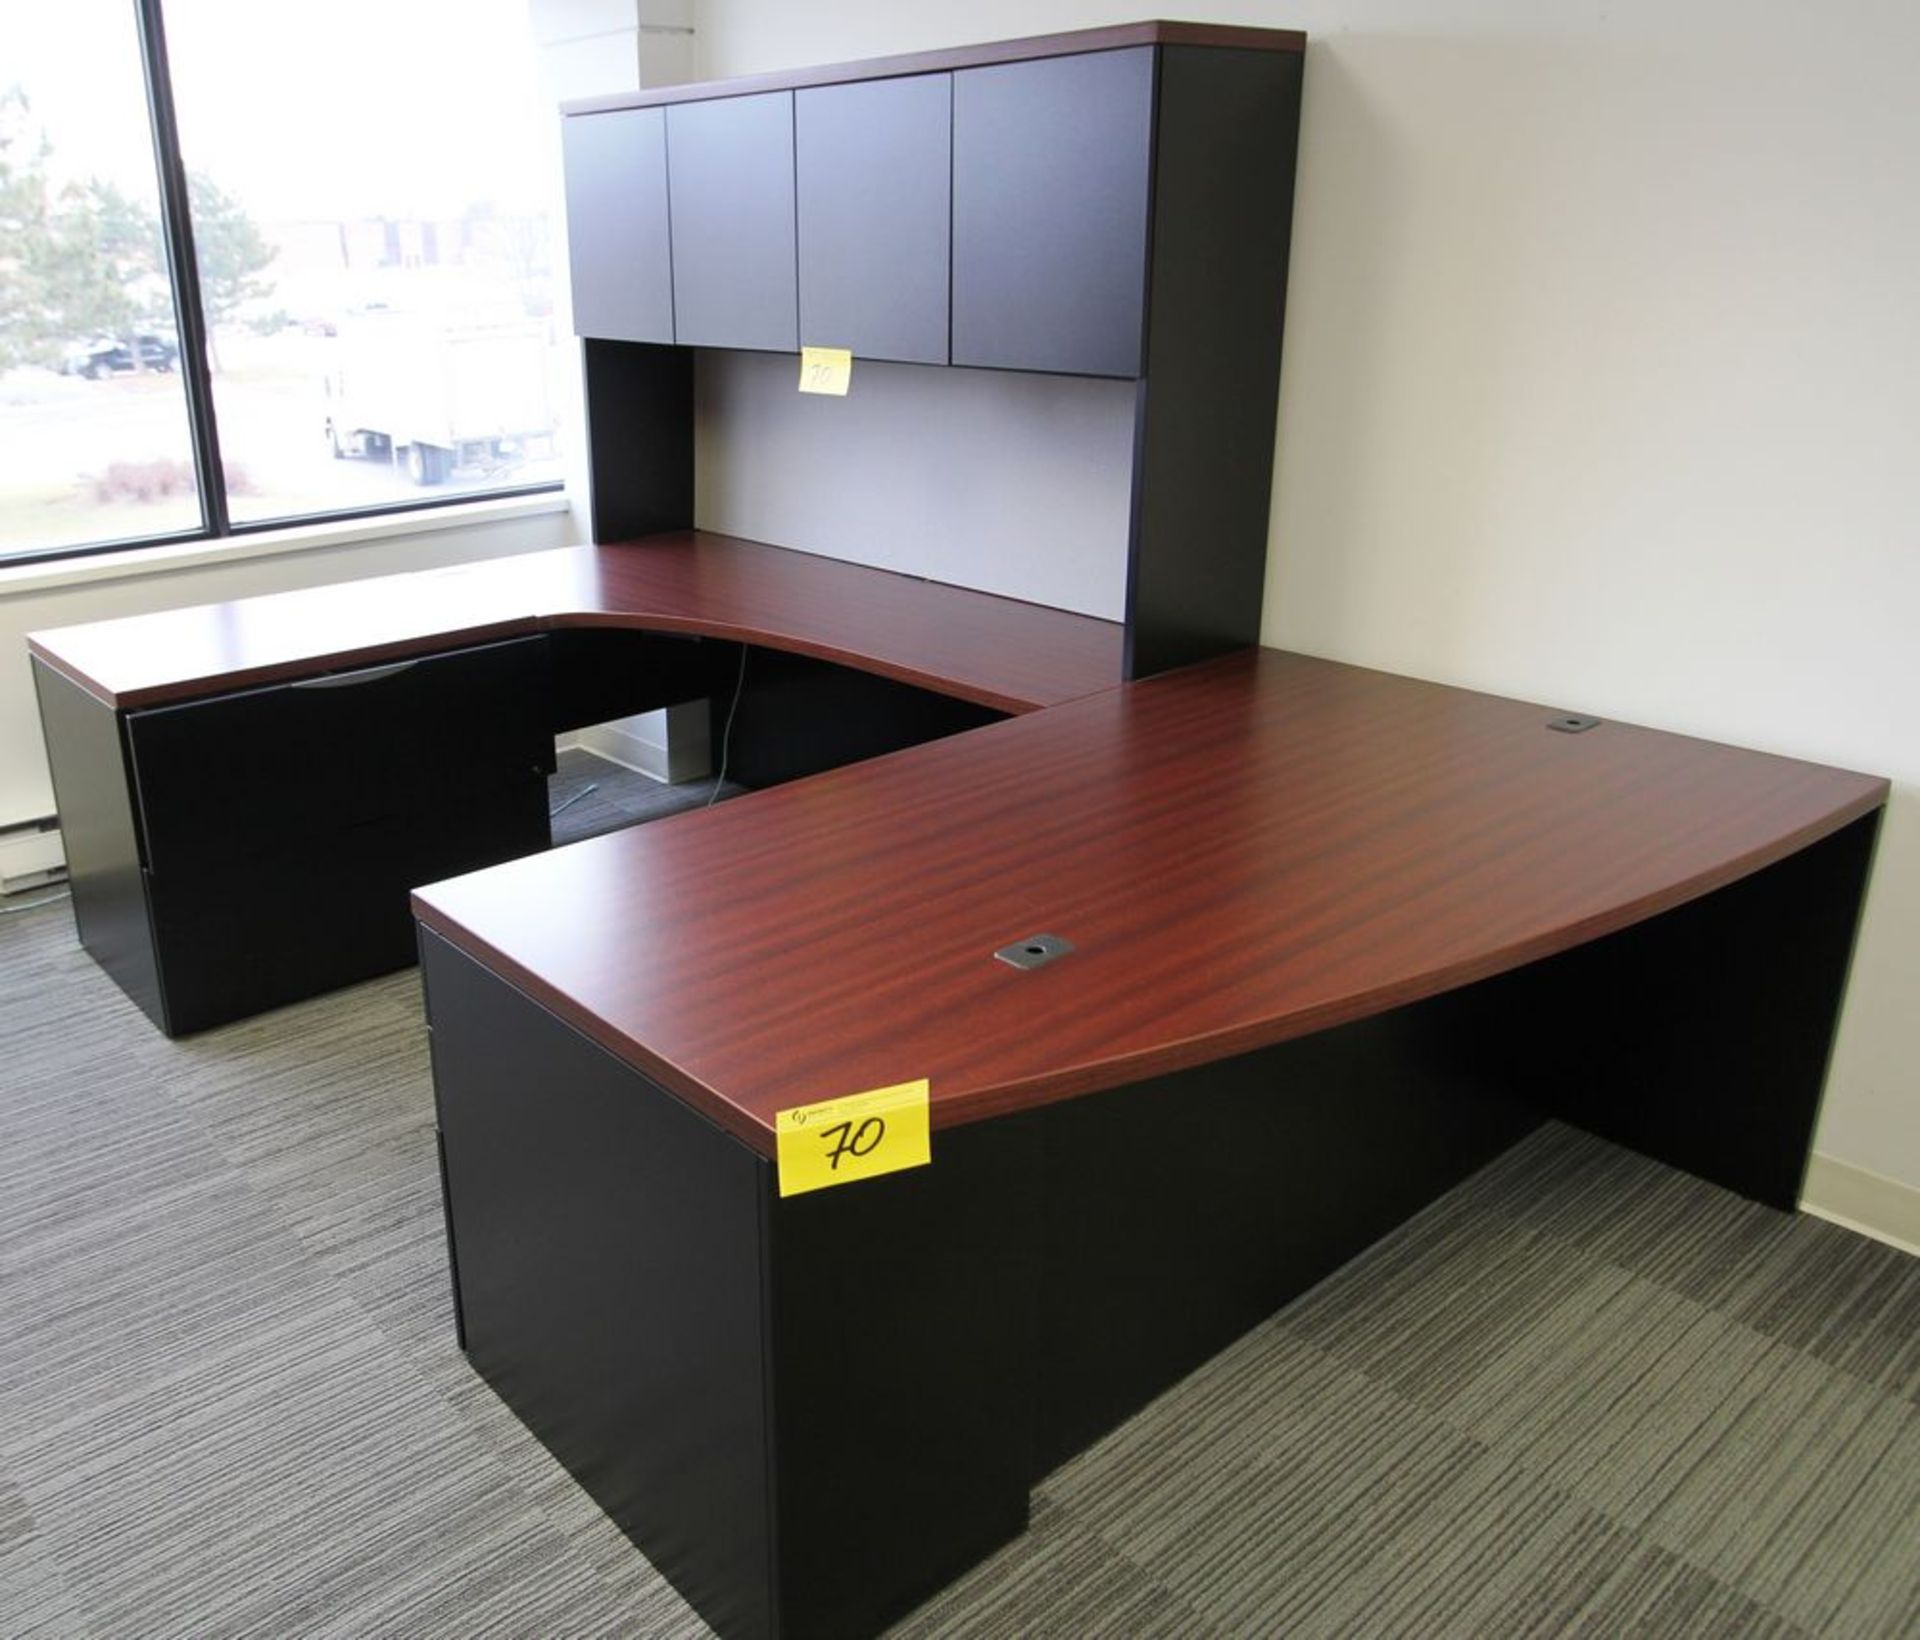 U-SHAPED DESK W/ OVERHEAD STORAGE, FILING CABINET AND MATCHING STORAGE CABINET